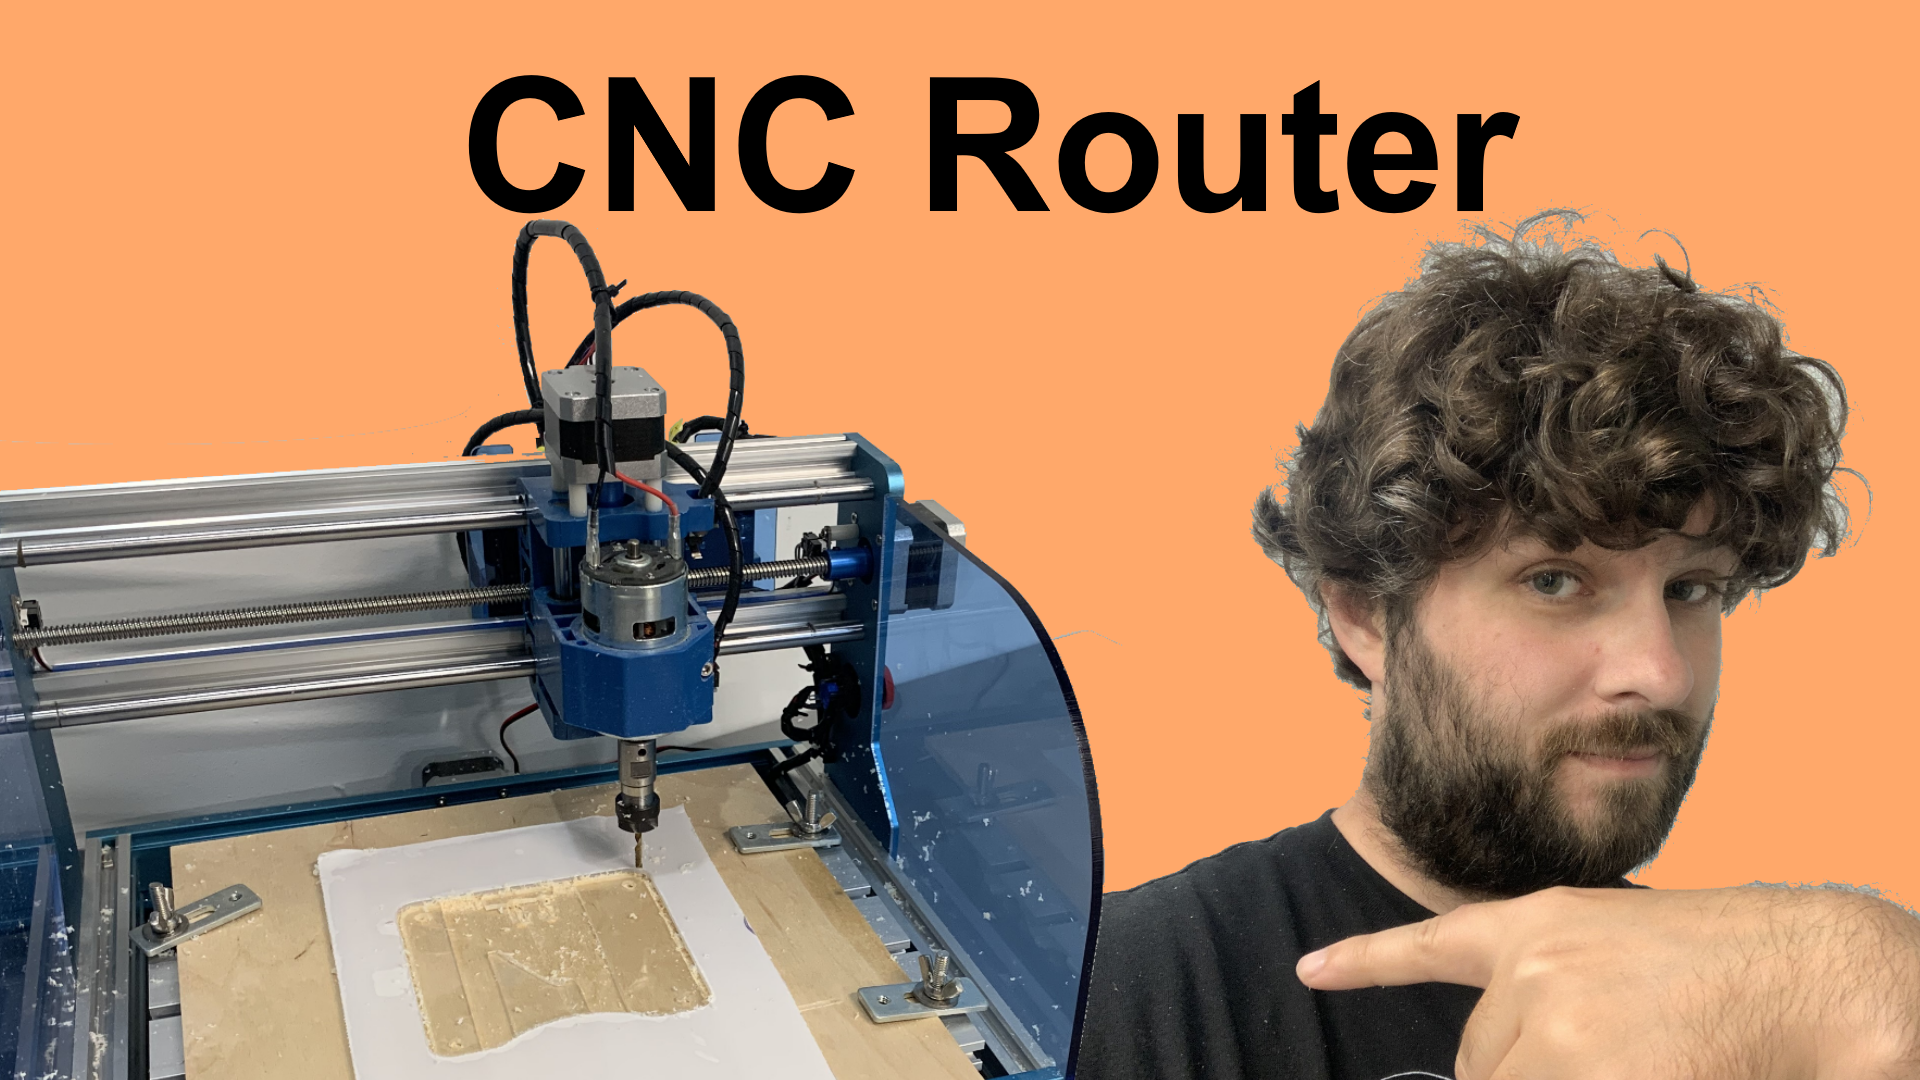 My Introduction to CNC - 3018 Desktop Router